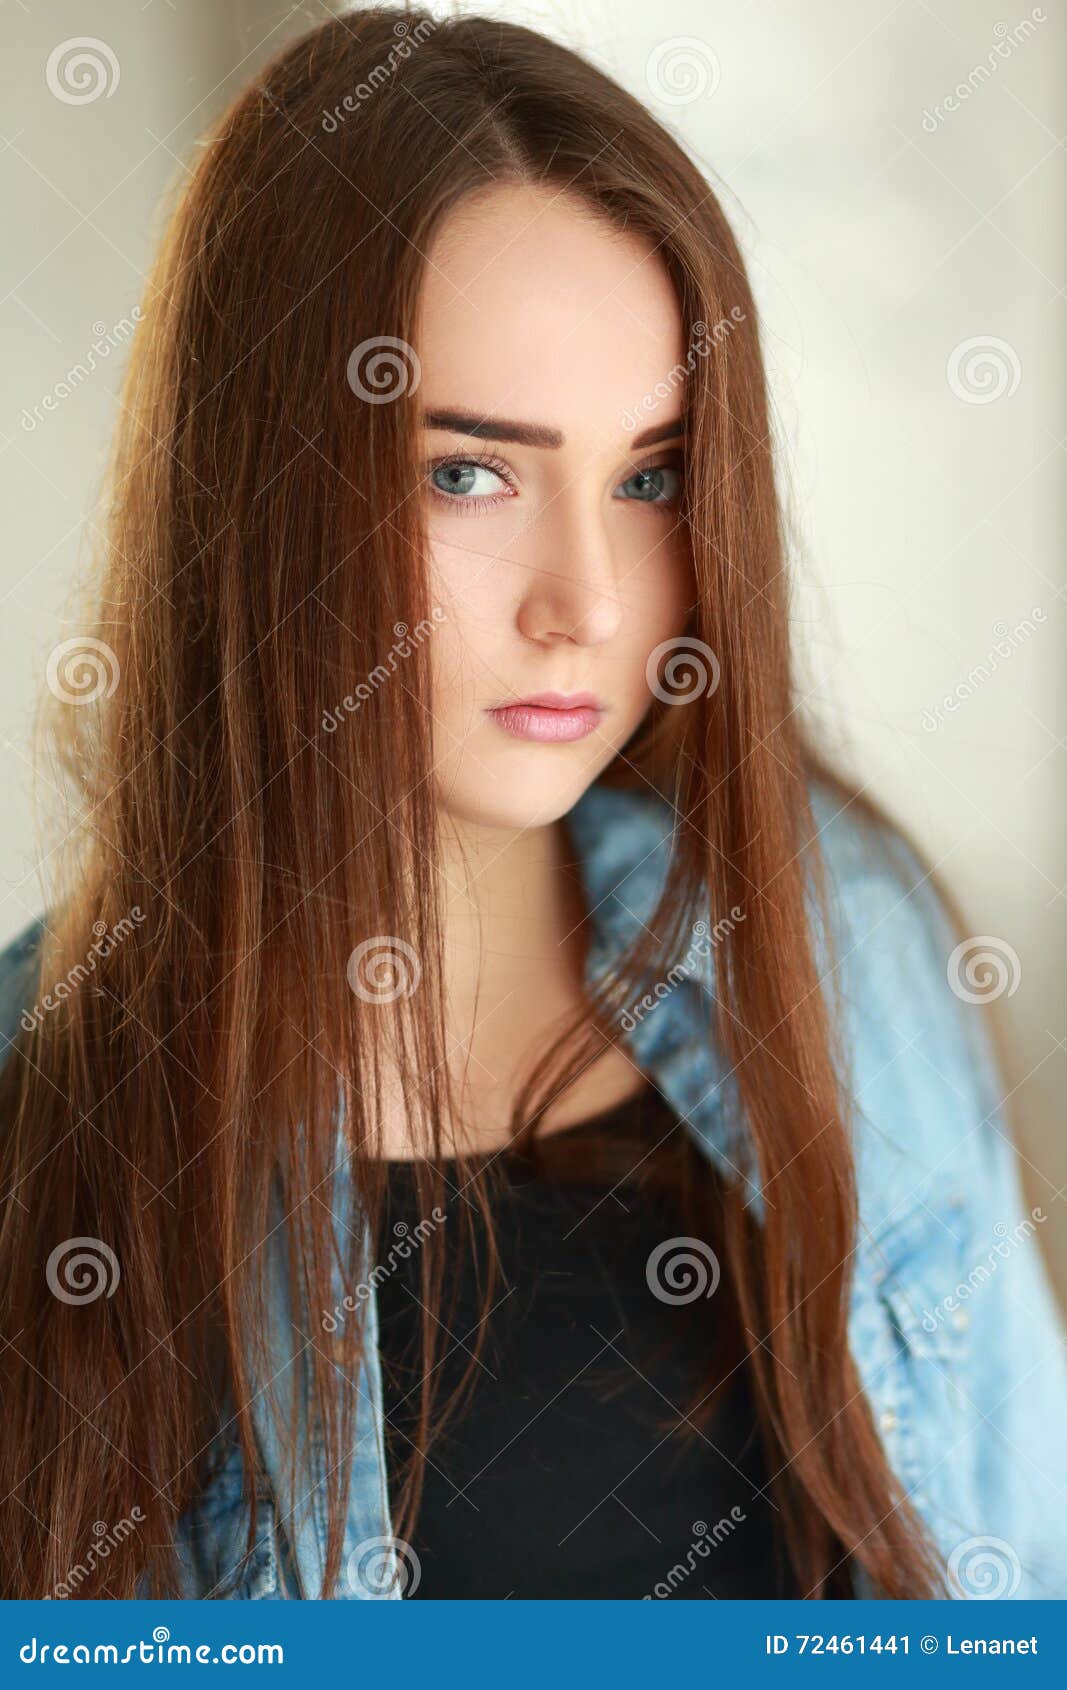 Sad young woman stock image. Image of loneliness, head - 72461441